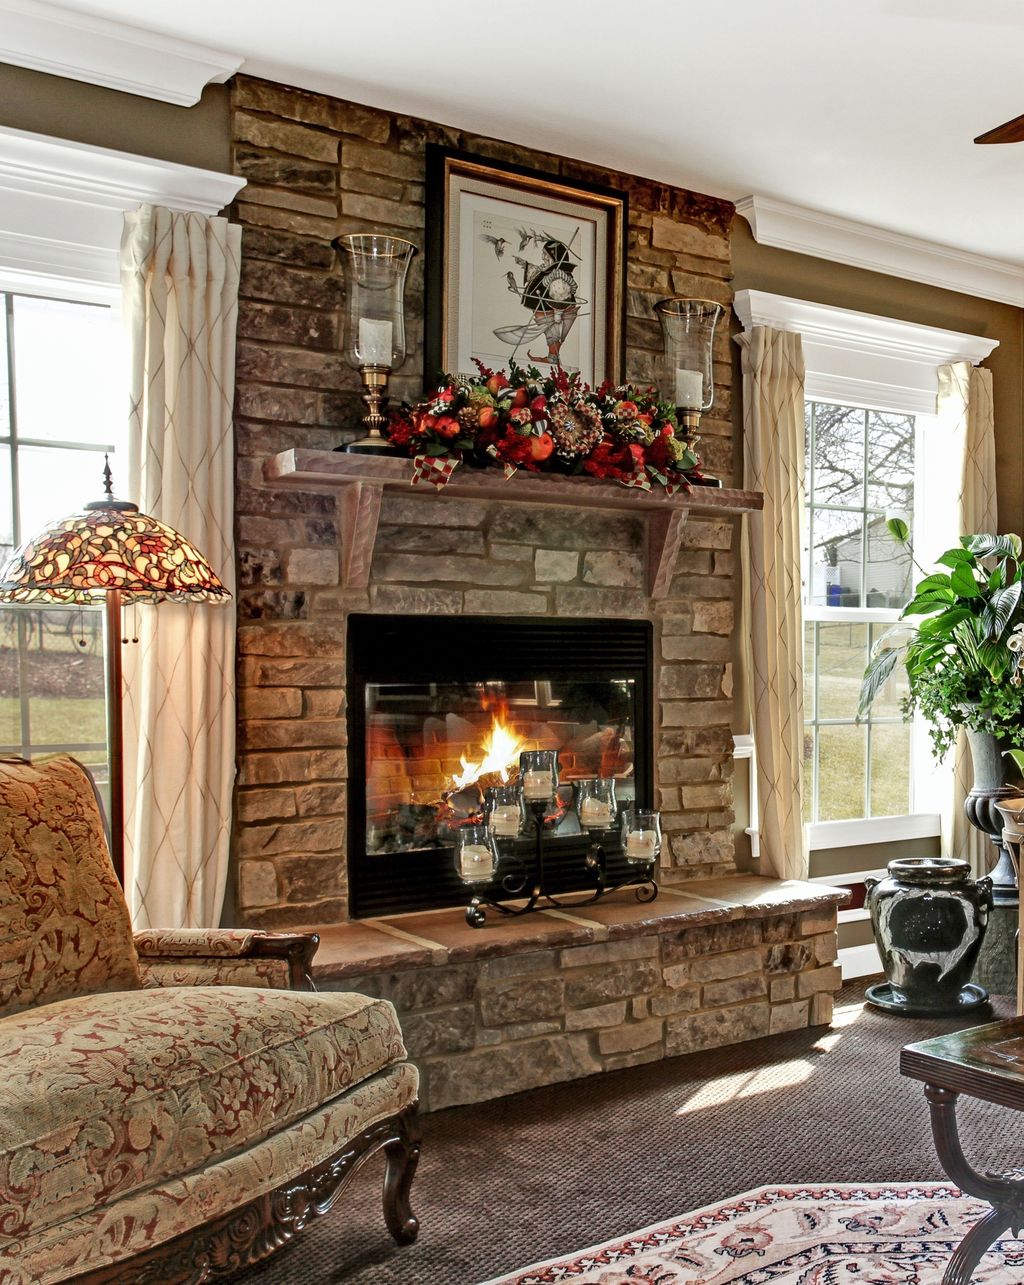 Awesome Living Room Design Ideas With Fireplace 08 - MAGZHOUSE